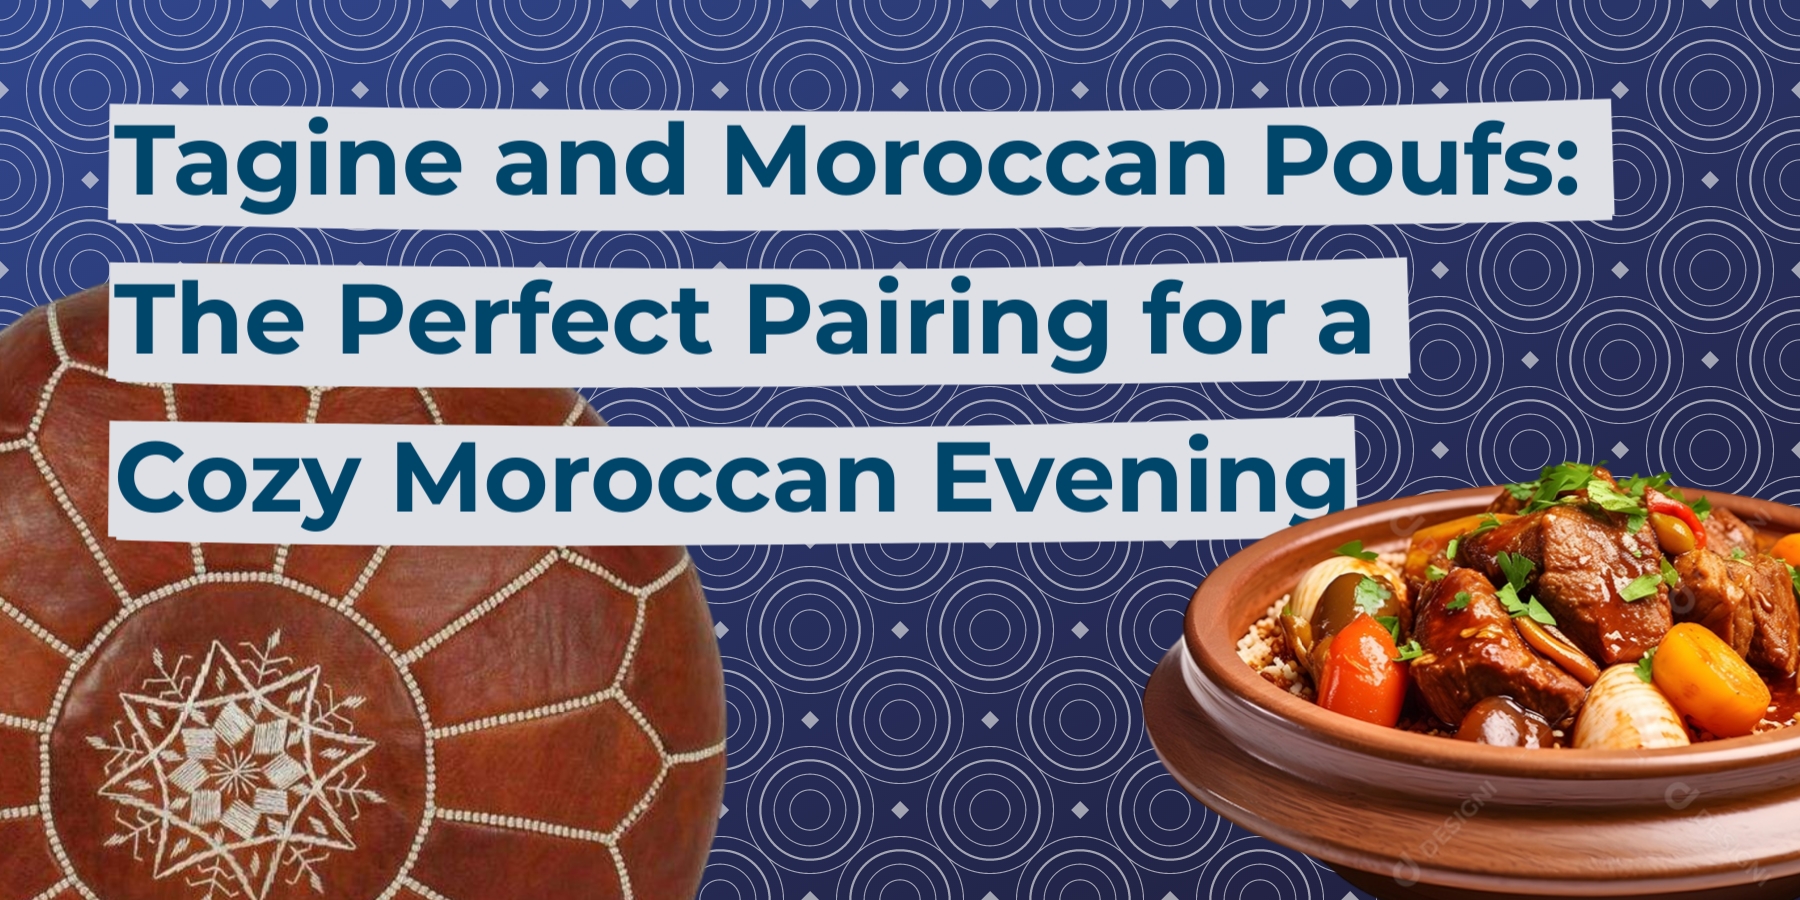 Tagine and Moroccan Poufs: The Perfect Pairing for a Cozy Moroccan Evening